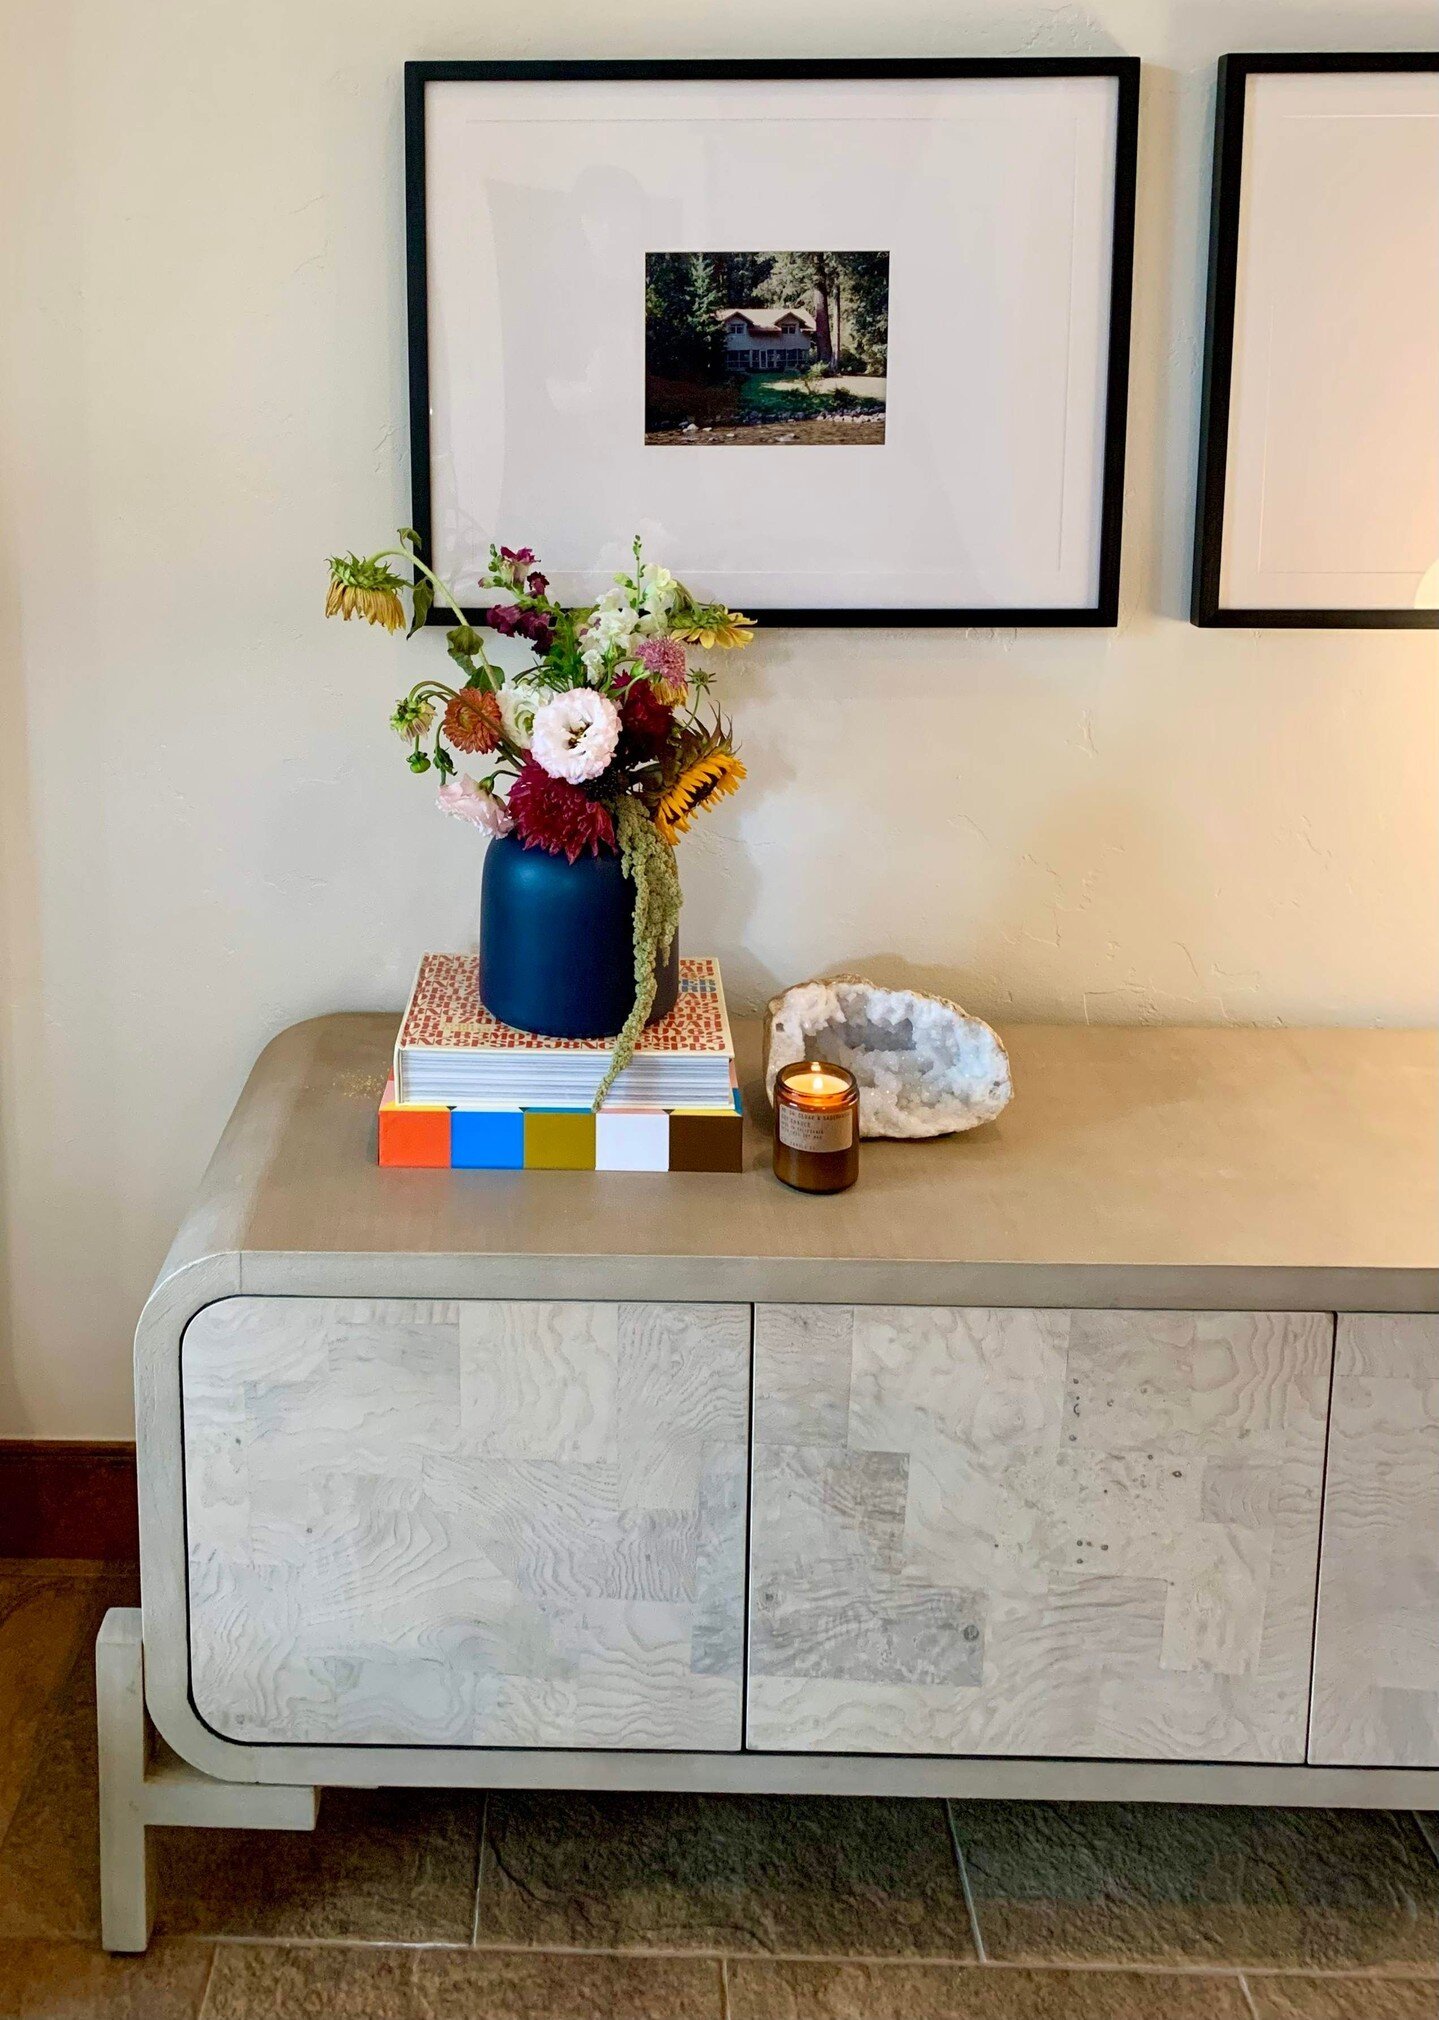 Minim moment from a recent install! We love when our clients cry happy tears and this was one of those special occasions. Out professional photos are going to happen soon so stay tuned for the full project!⁣
⁣
#dorothyparkerdesign⁣
.⁣
.⁣
#durangocolo